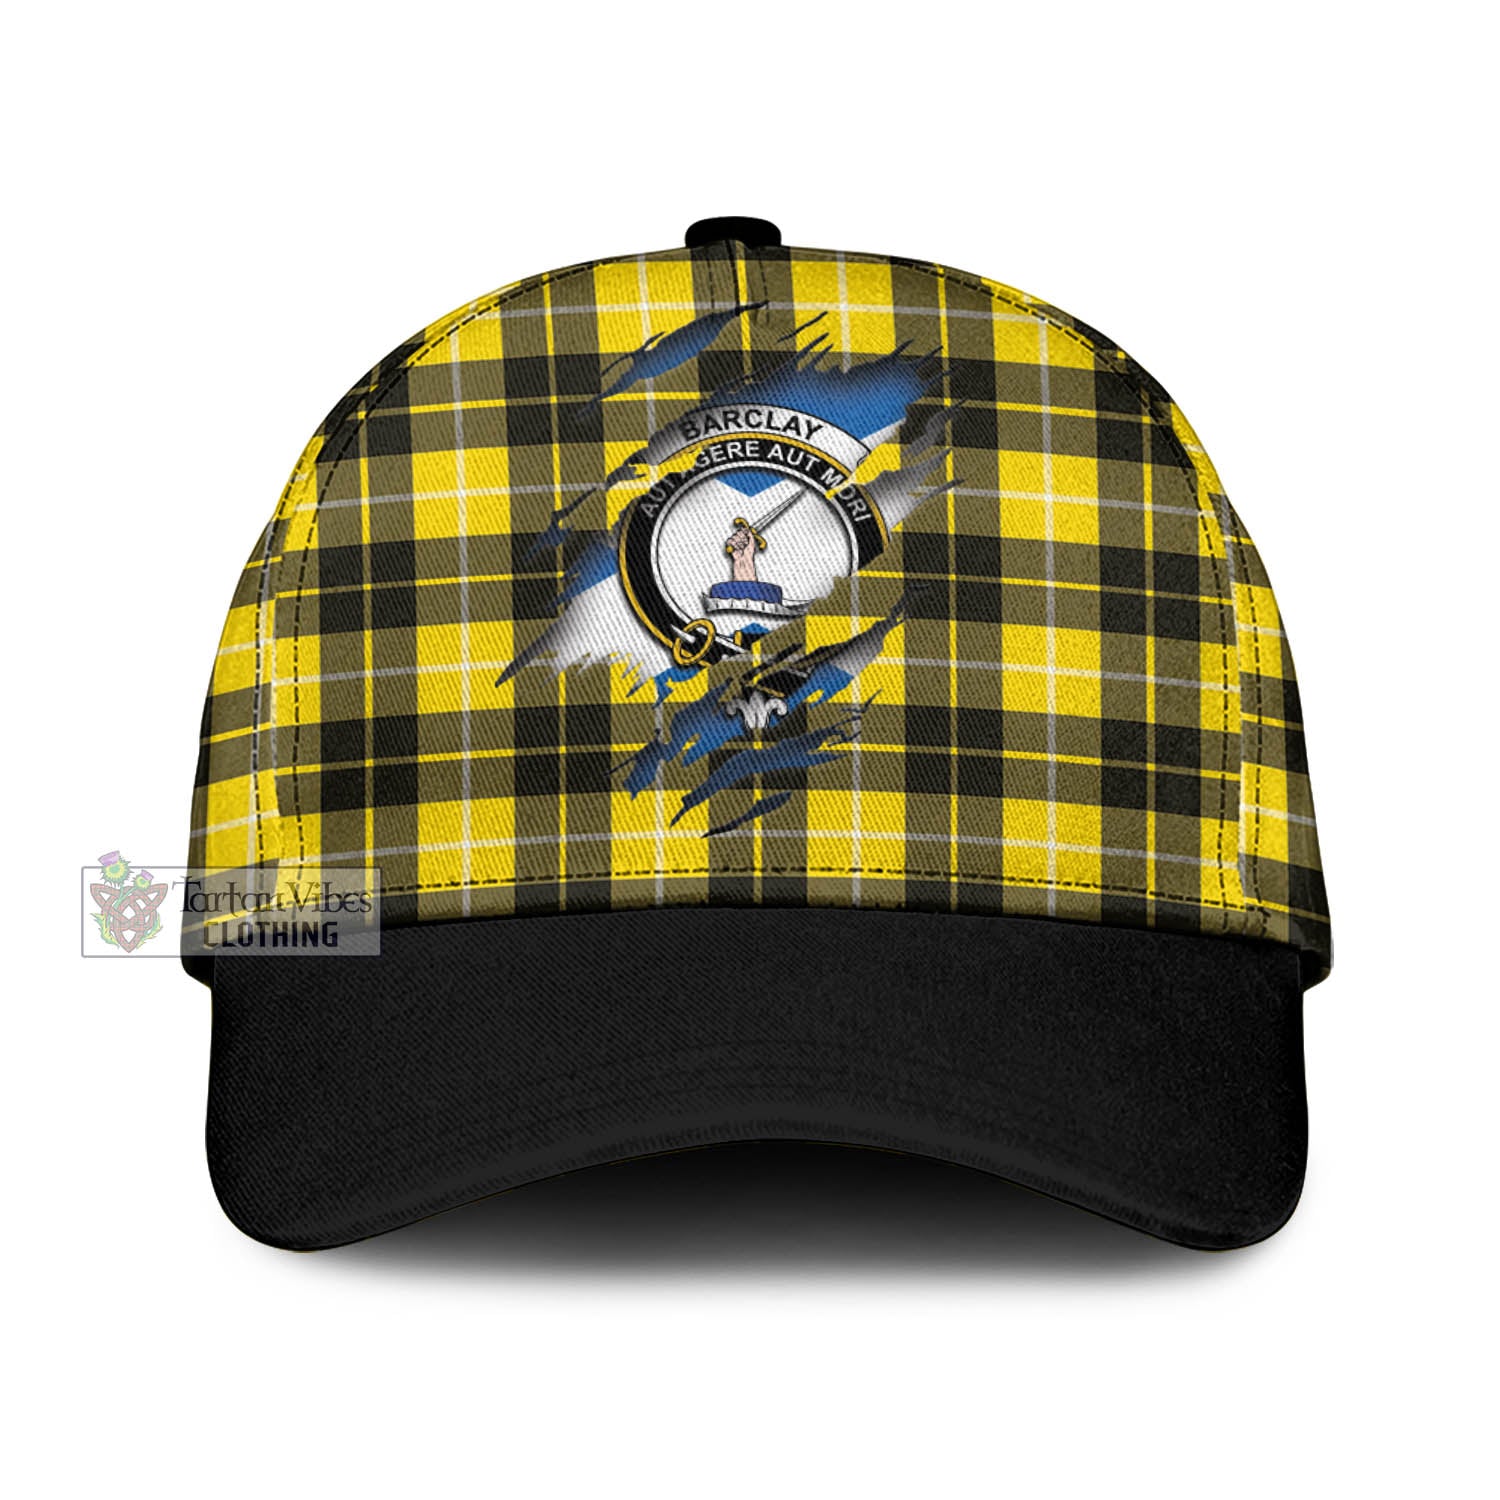 Tartan Vibes Clothing Barclay Dress Modern Tartan Classic Cap with Family Crest In Me Style